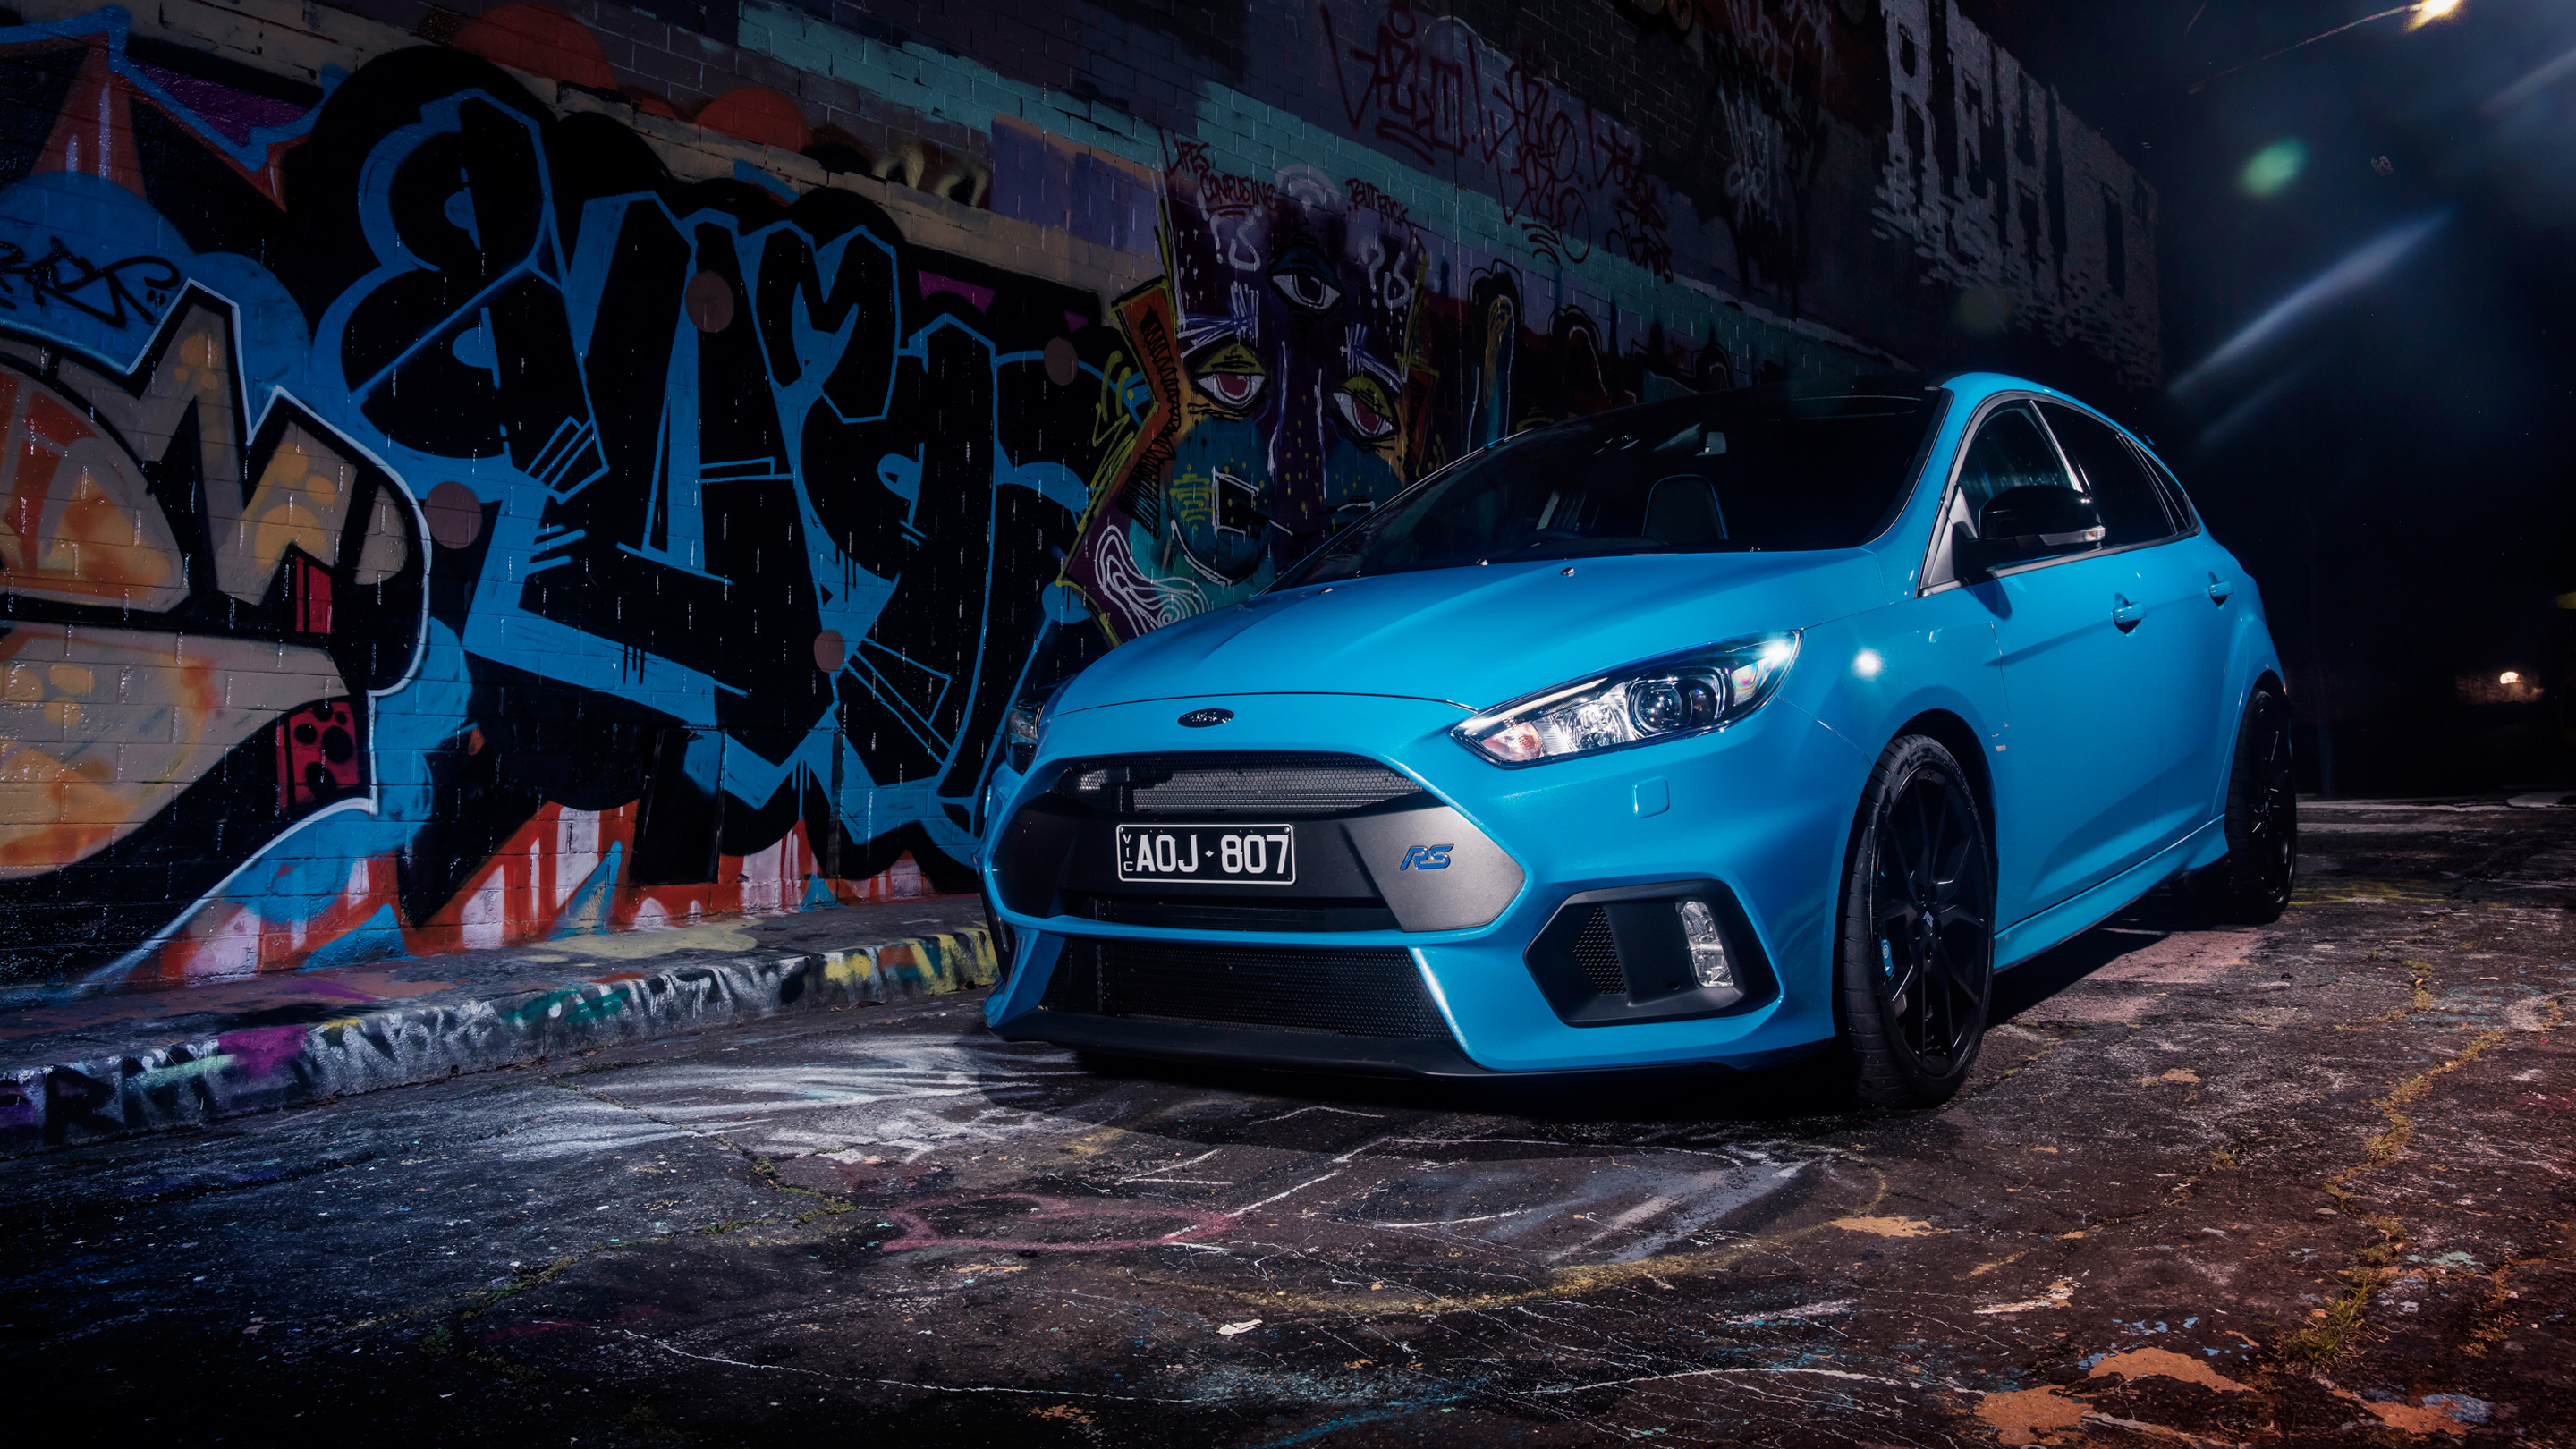 Blue Car Ford Focus Rs Limited Edition 2018 On The Background Of Graffiti Wallpapers And Images Wallpapers Pictures Photos